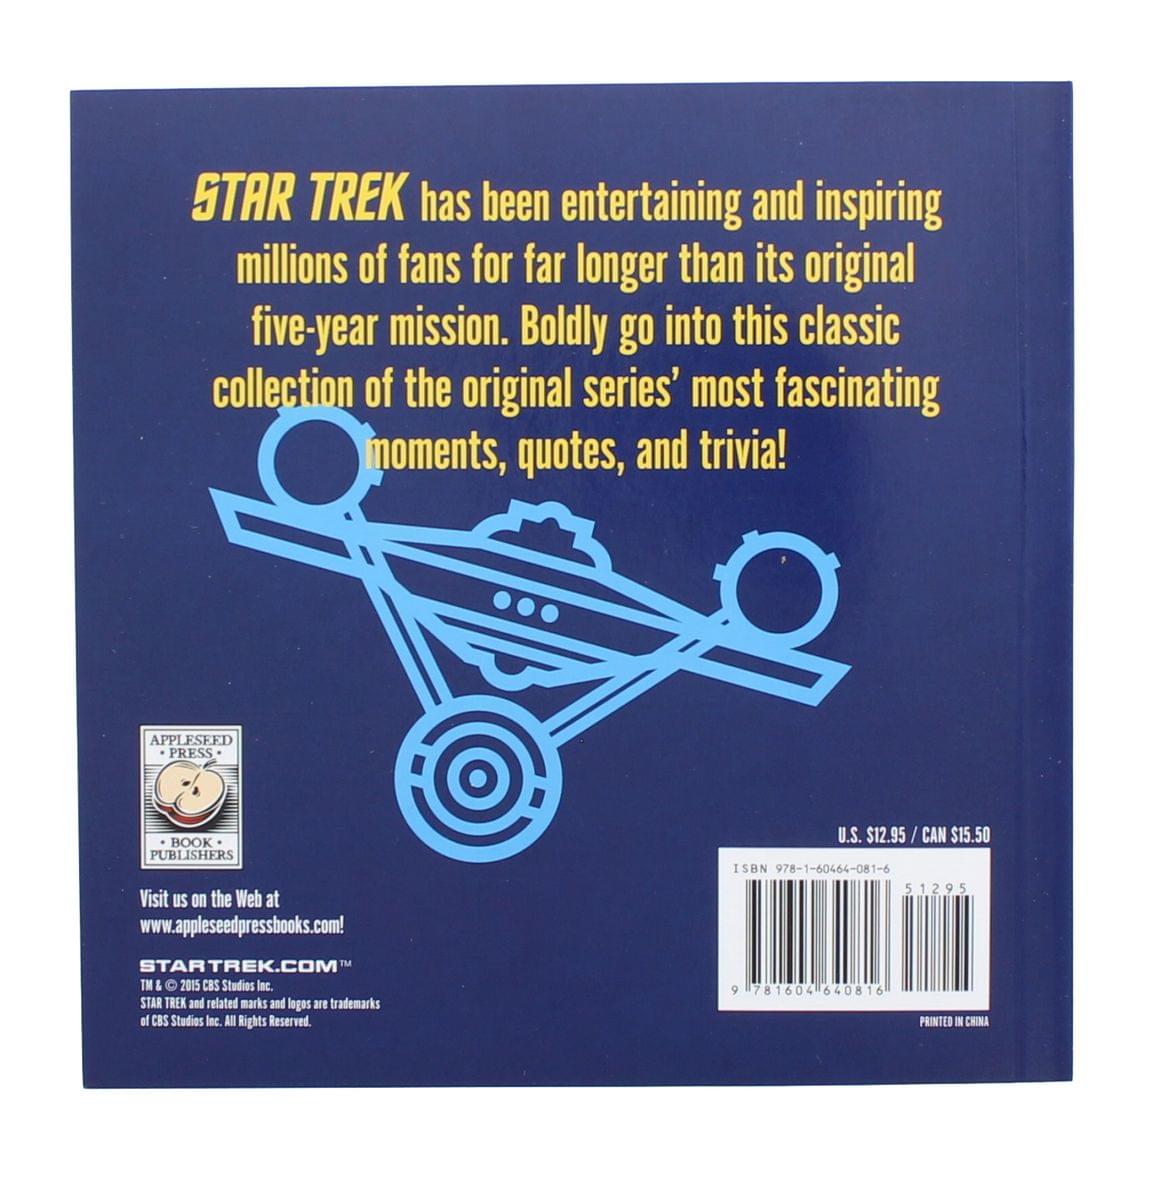 The Wit and Wisdom of Star Trek Paperback Book